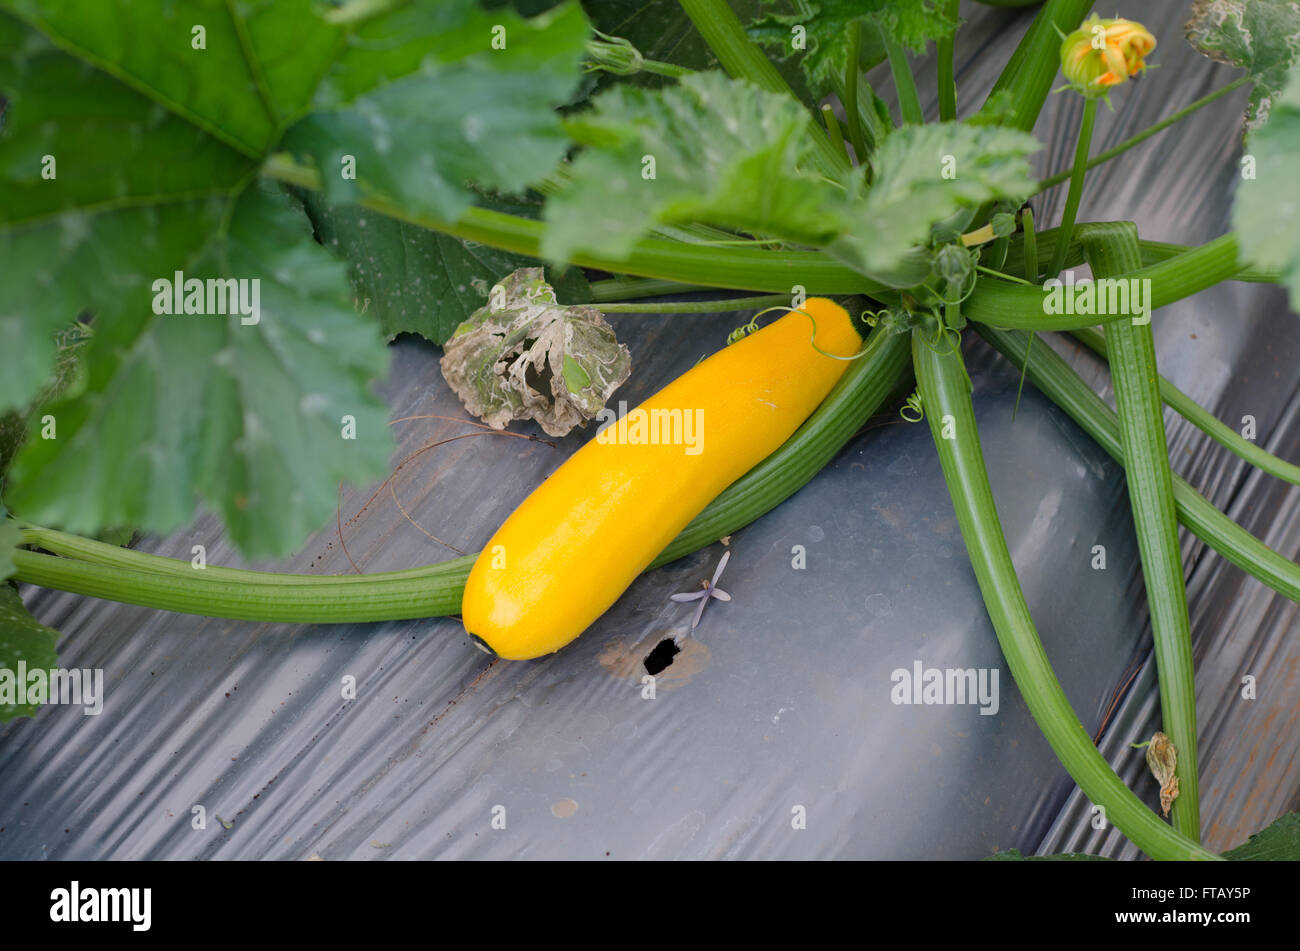 Zucchini or courgette plants growing in garden Stock Photo